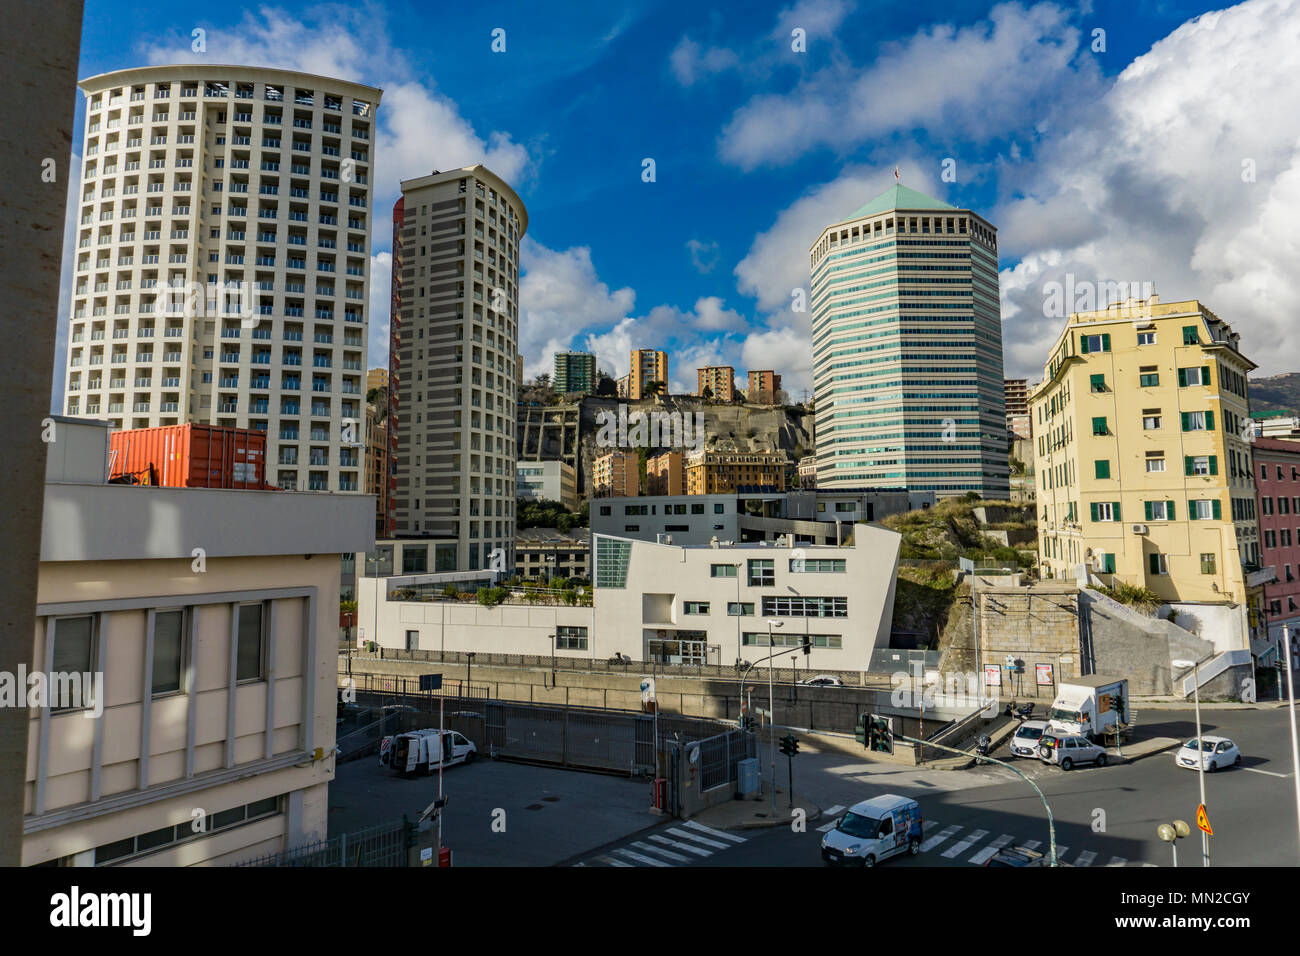 Detail from the strets of Genoa, Italy. Genoa is sixth largest city in Italy. Stock Photo